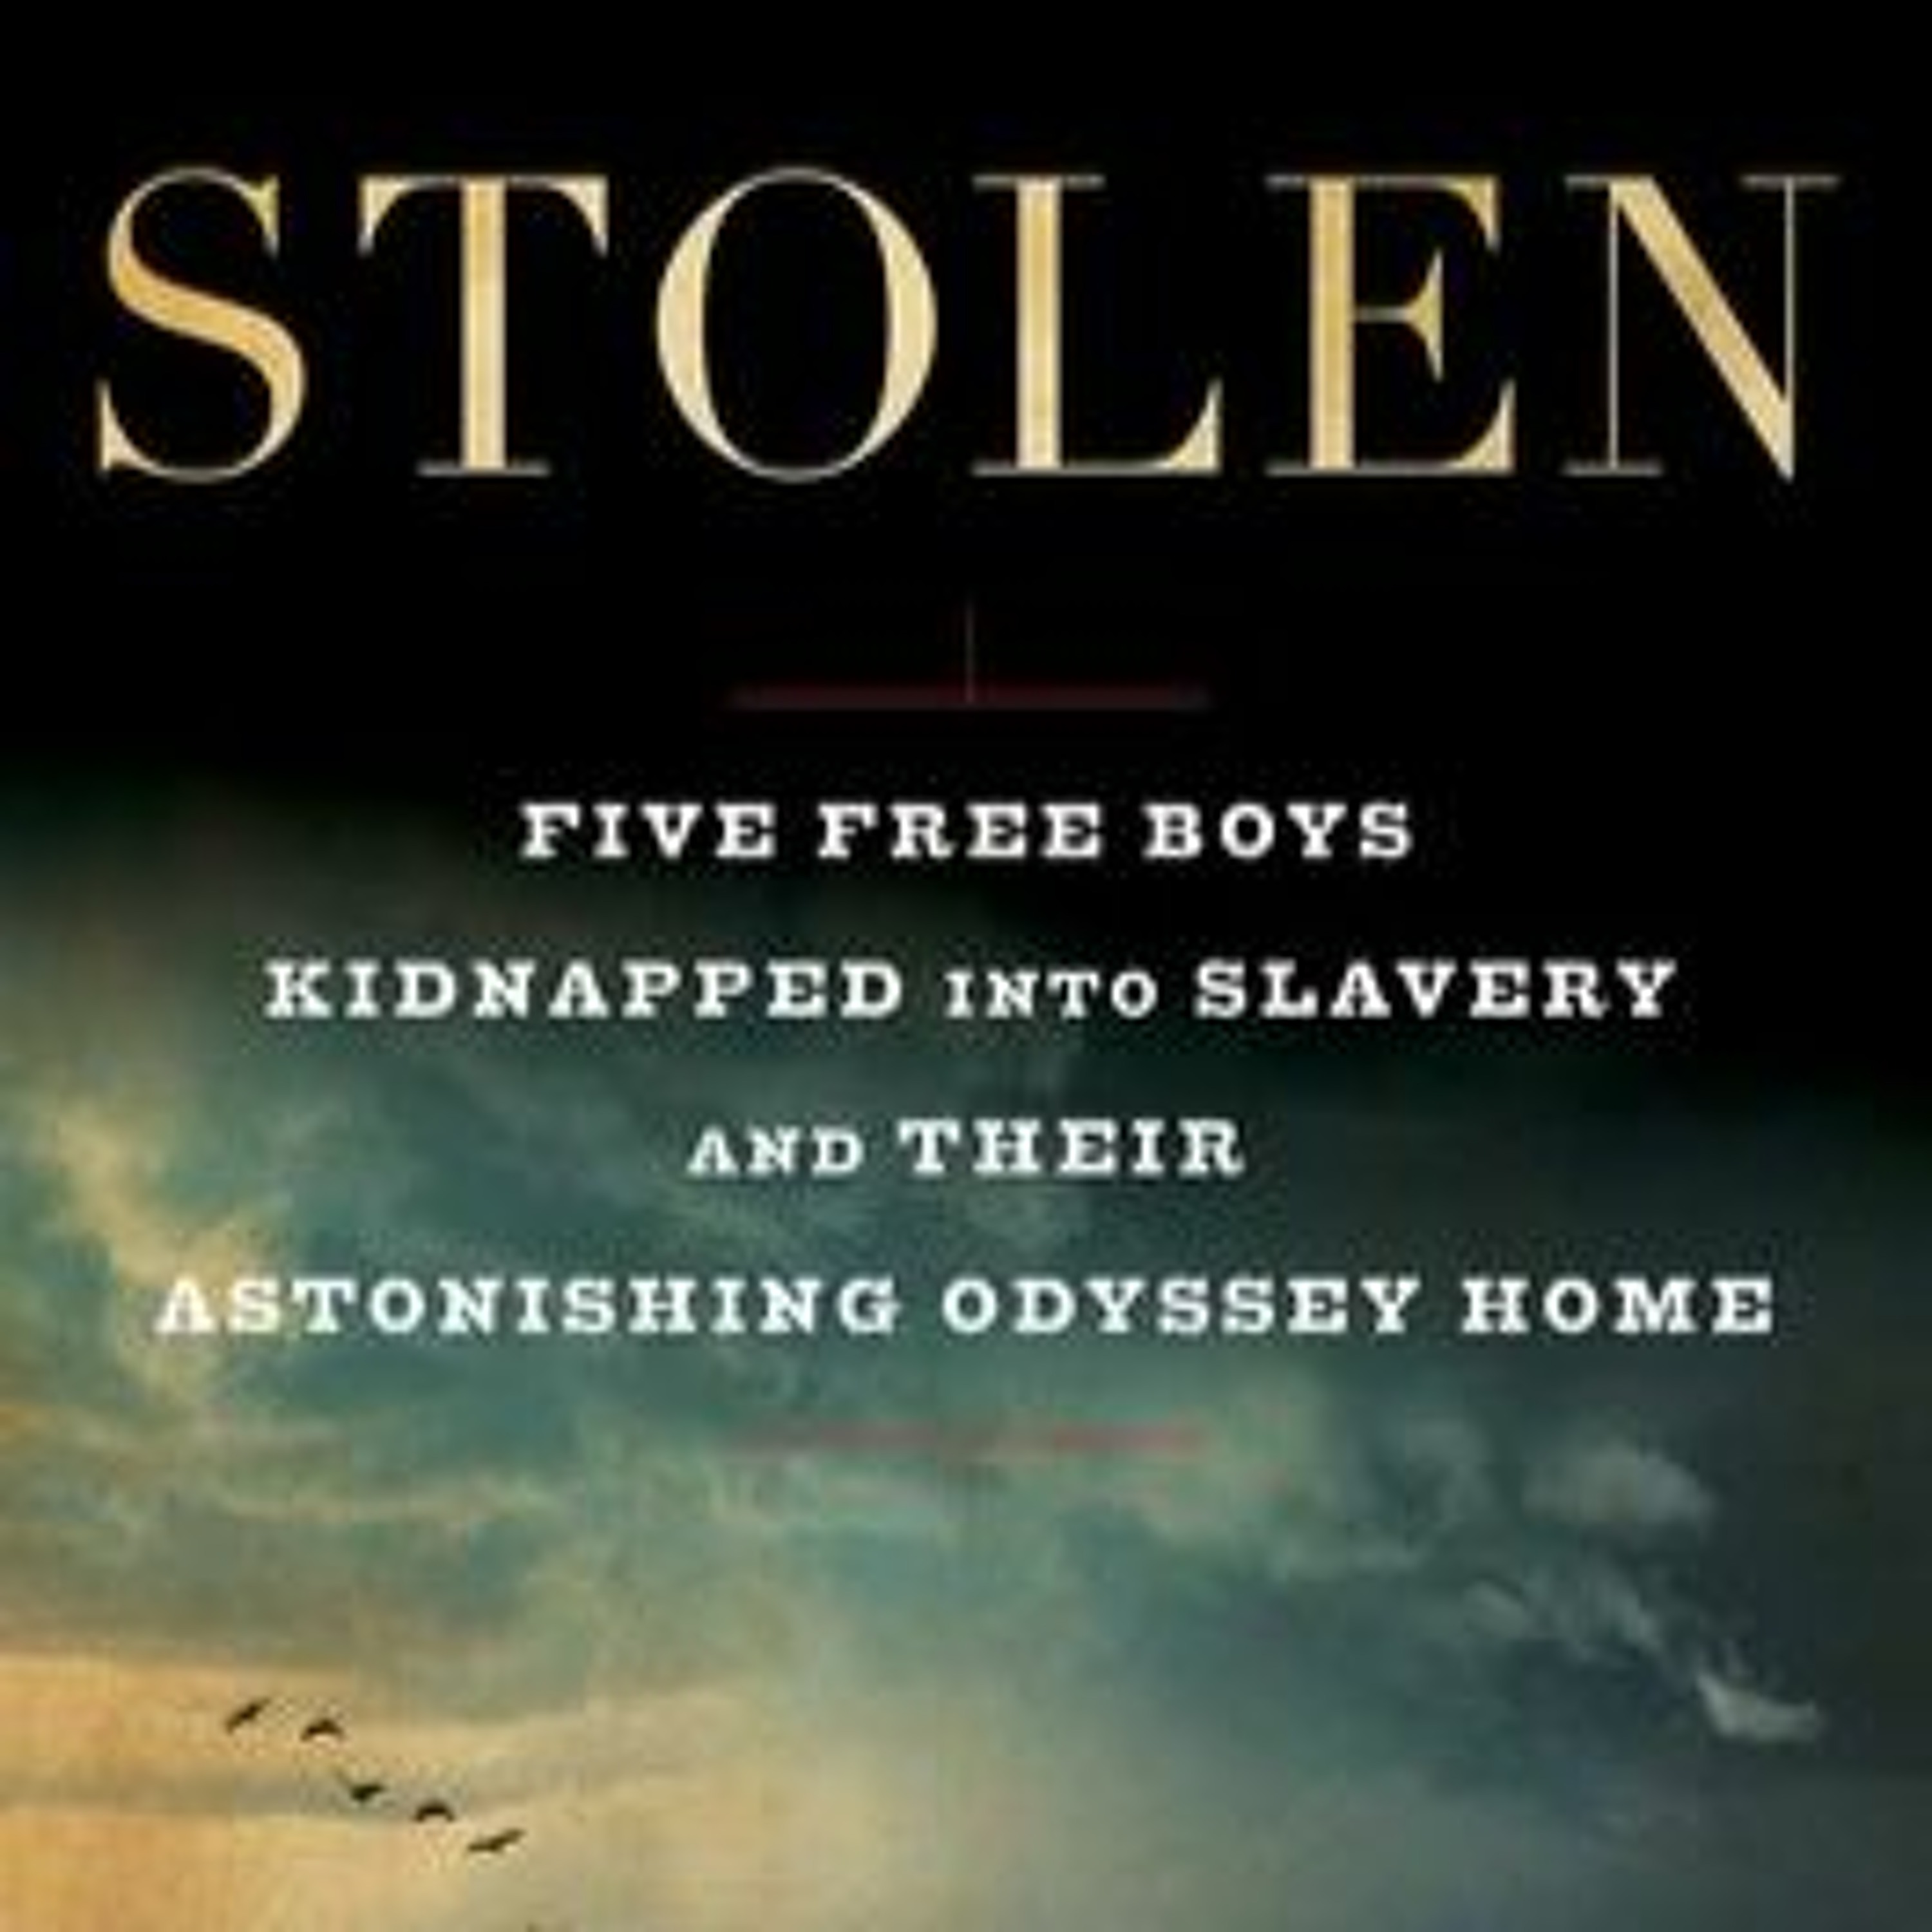 Richard Bell, “Stolen: Five Free Boys Kidnapped into Slavery and Their Astonishing Odyssey Home”